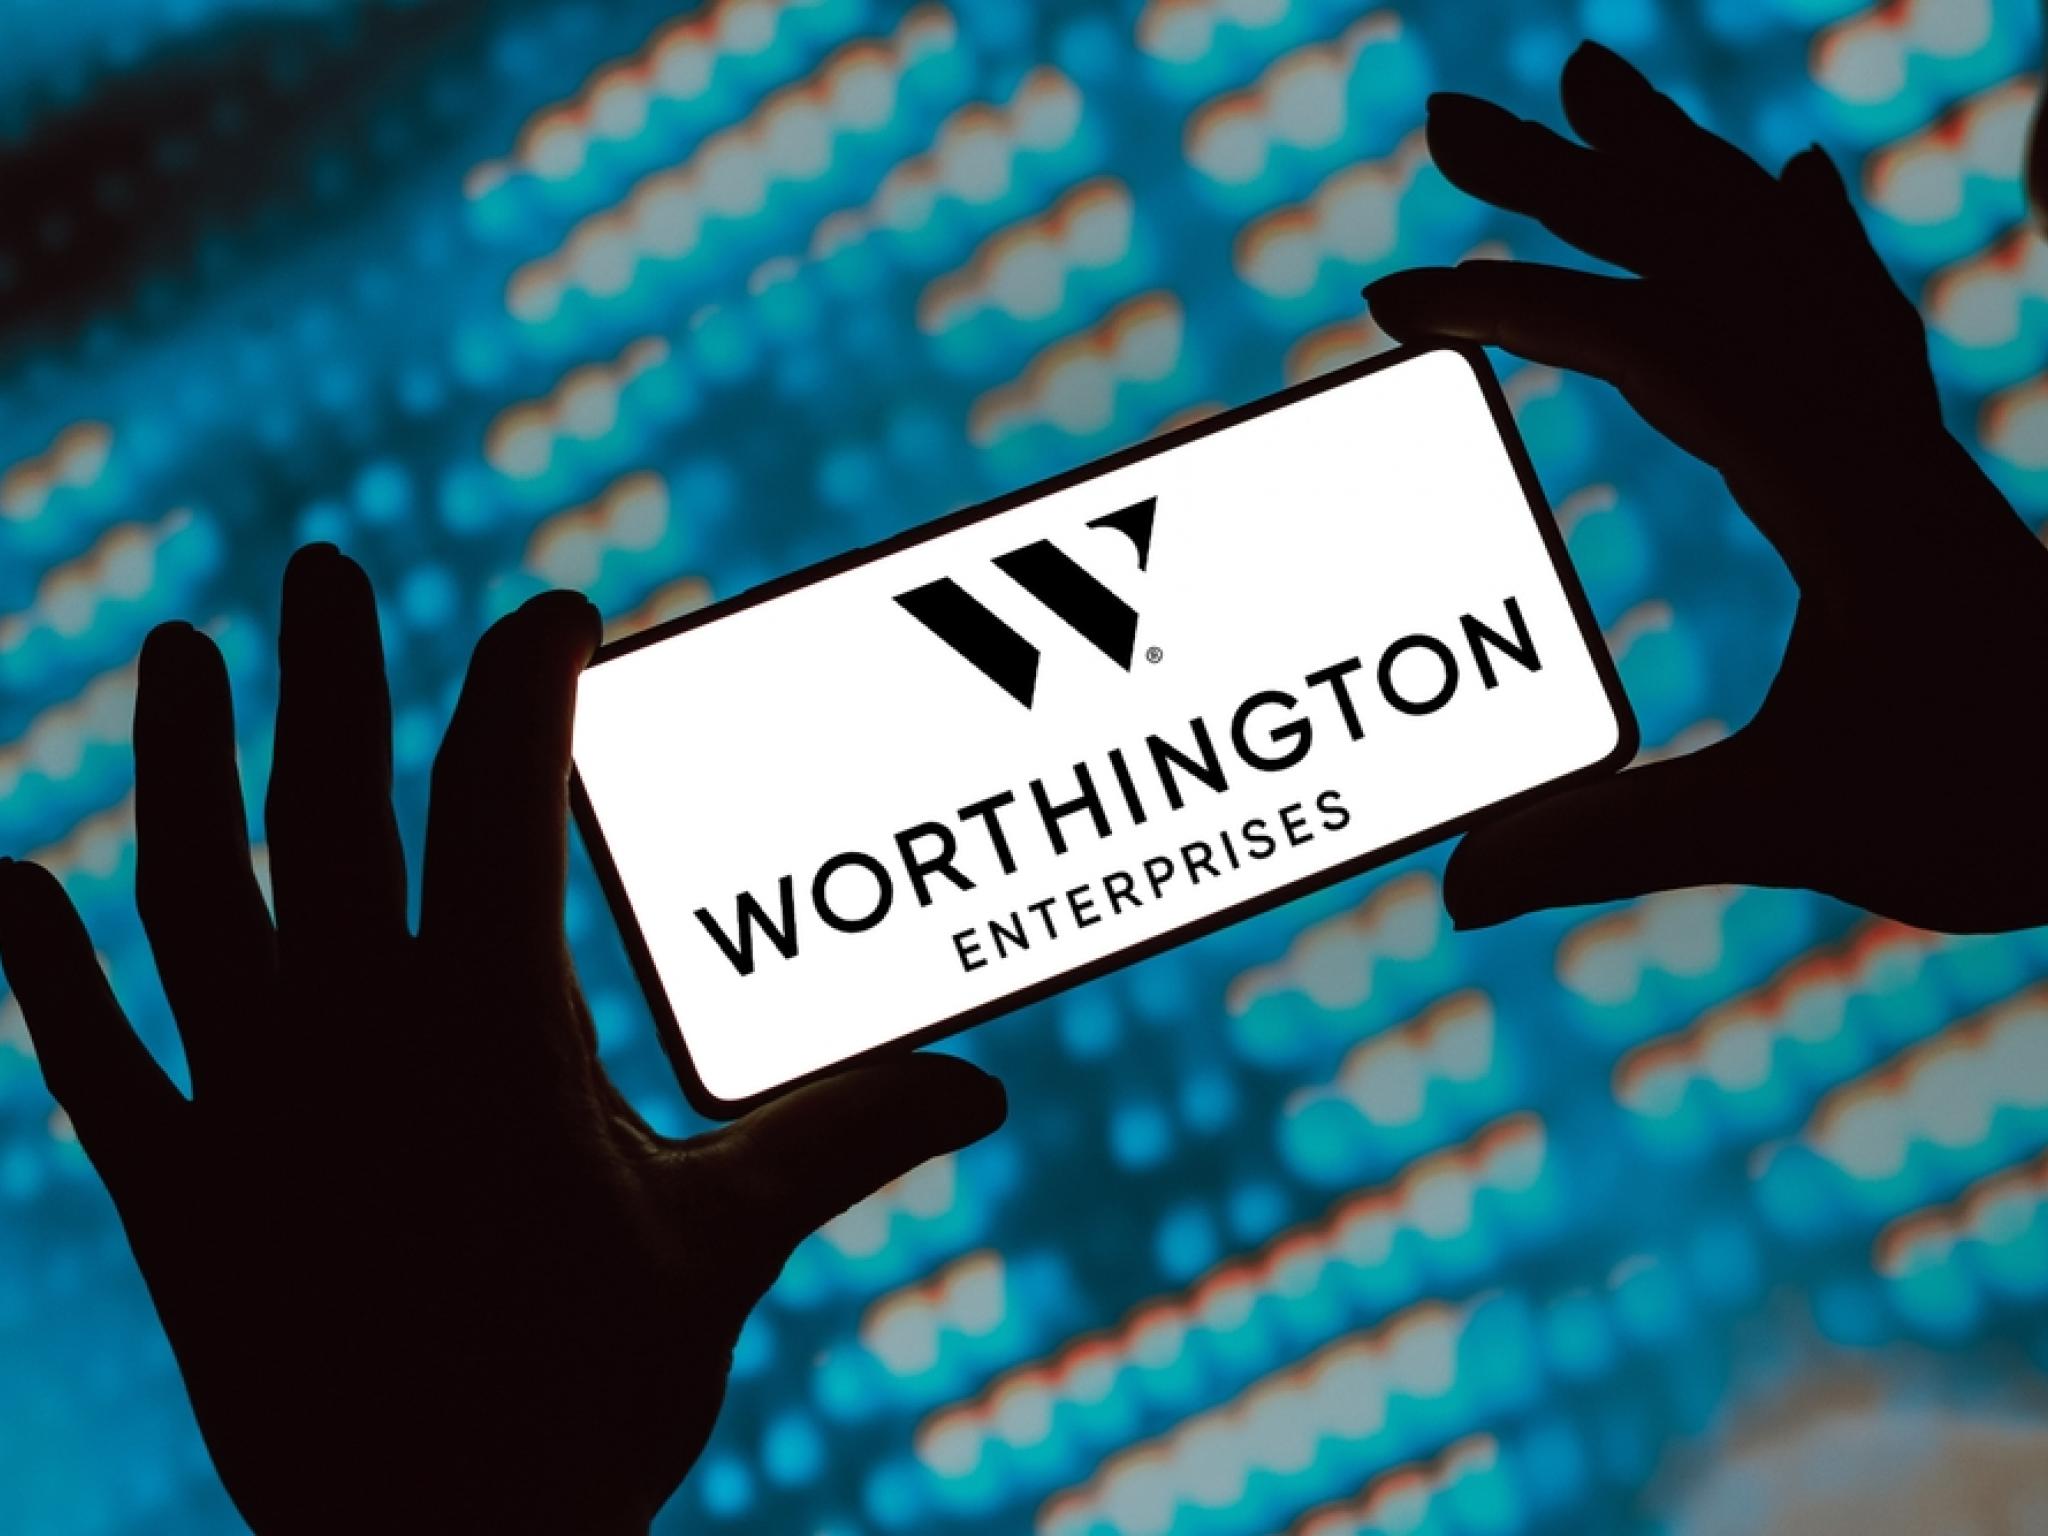  how-to-earn-500-a-month-from-worthington-enterprises-stock-ahead-of-q4-earnings 